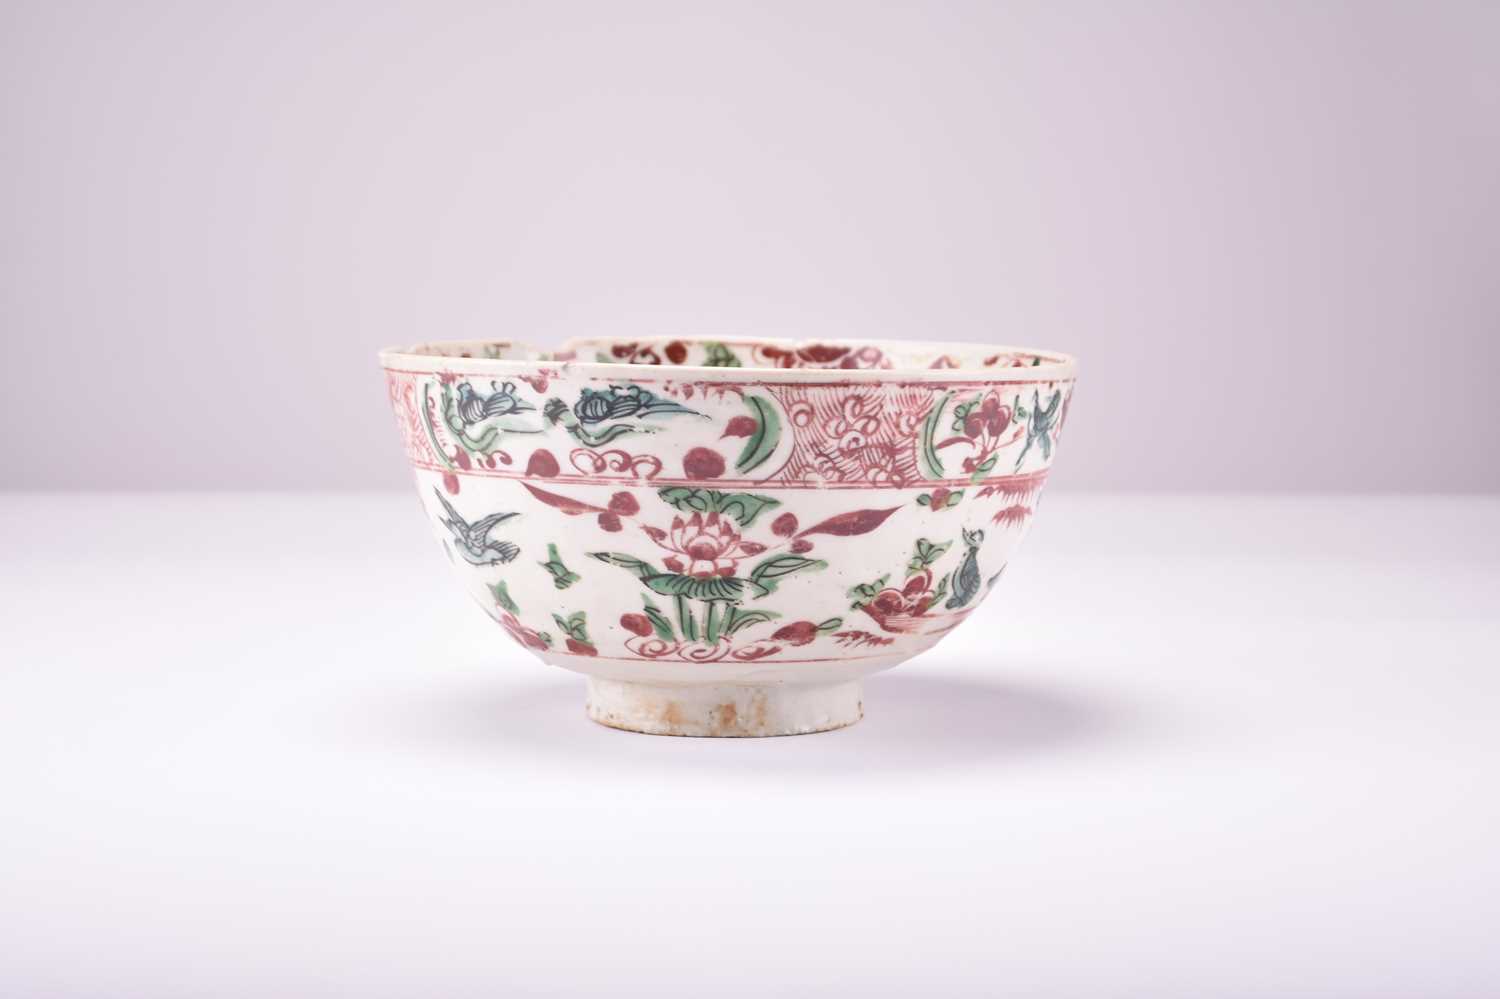 Lot 519 - A Chinese porcelain bowl, late Ming Dynasty